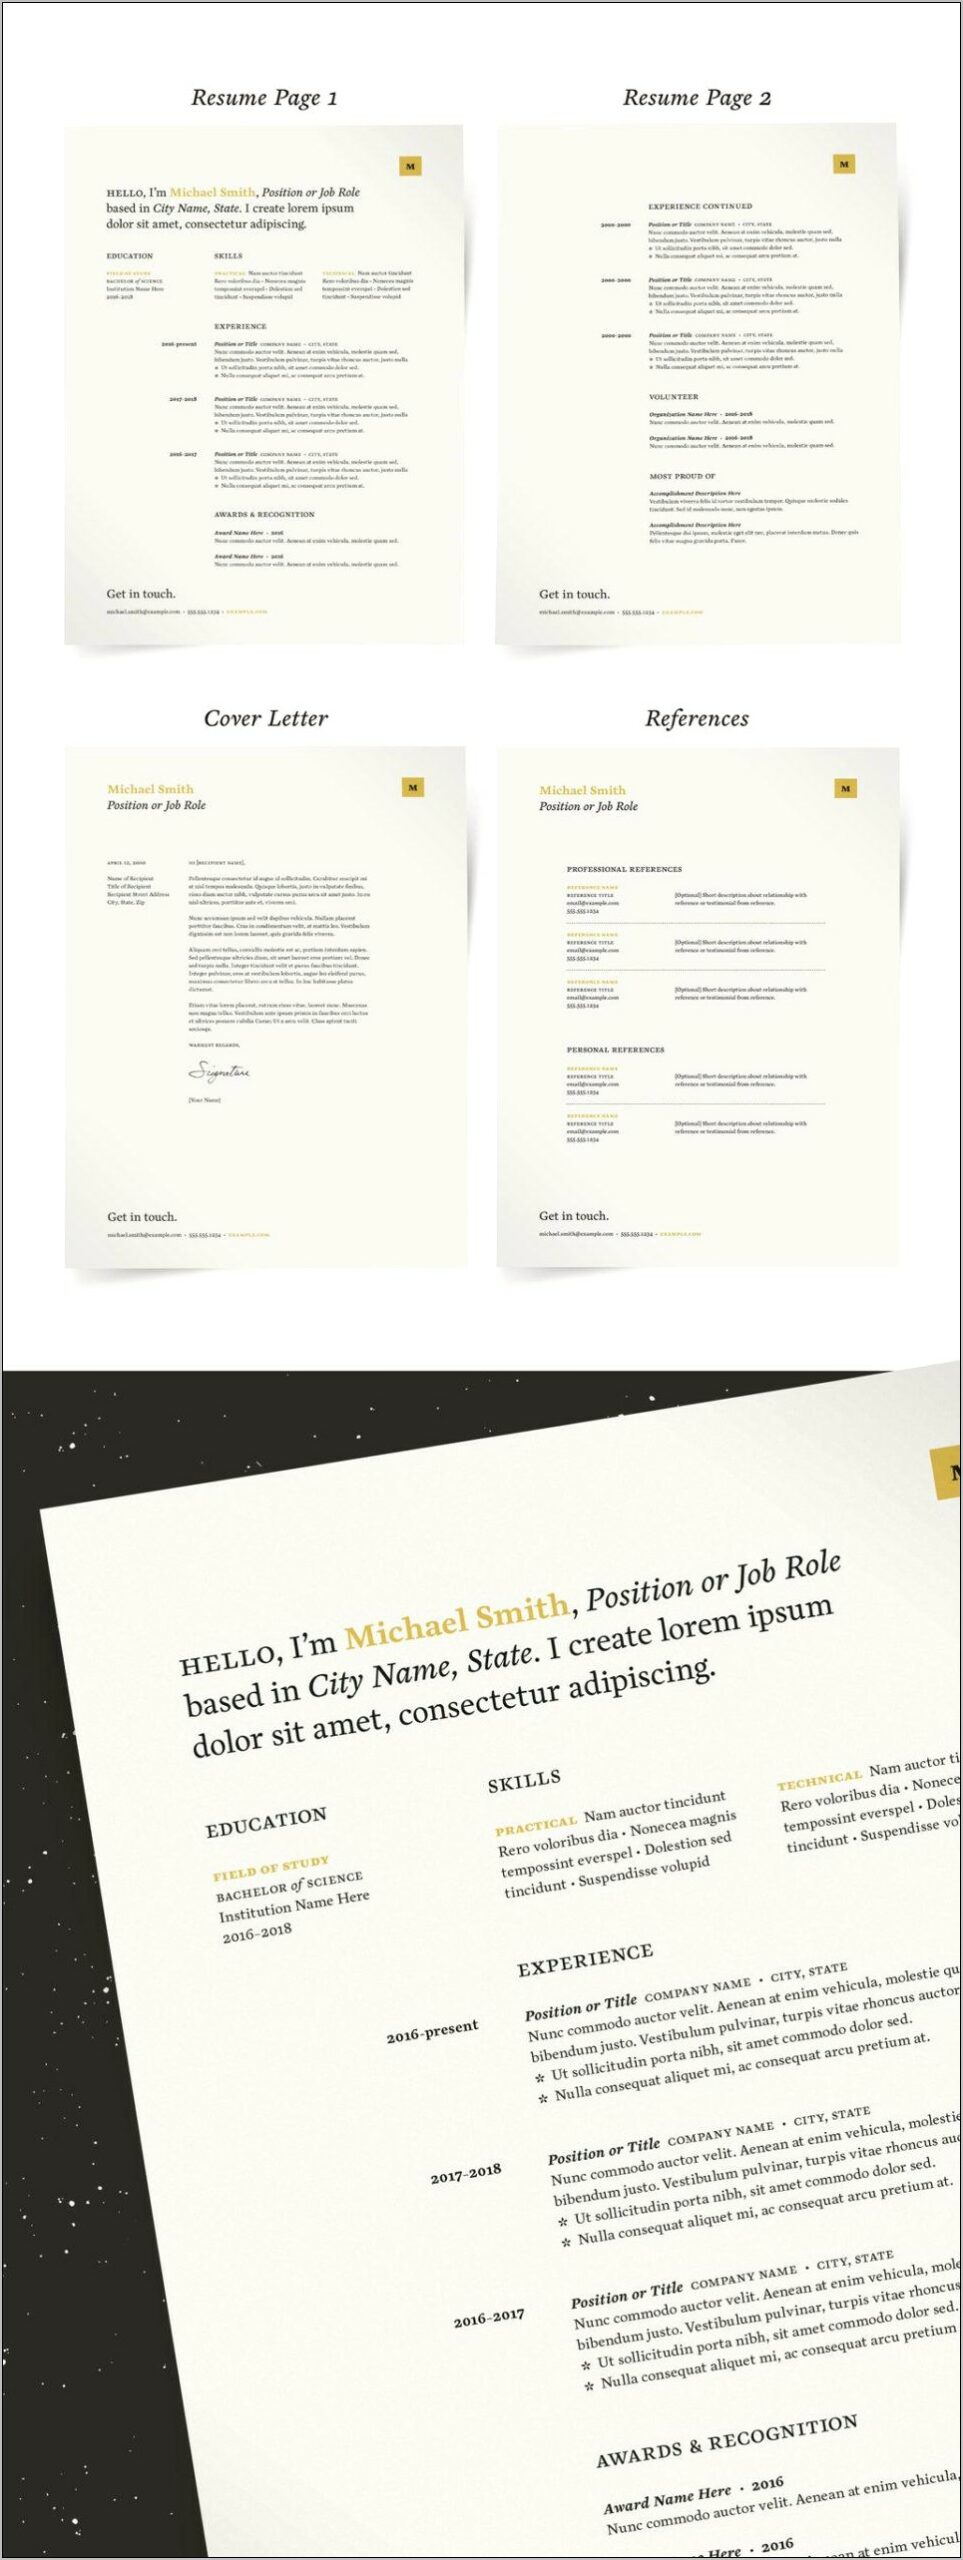 Opening Header For Resume Examples